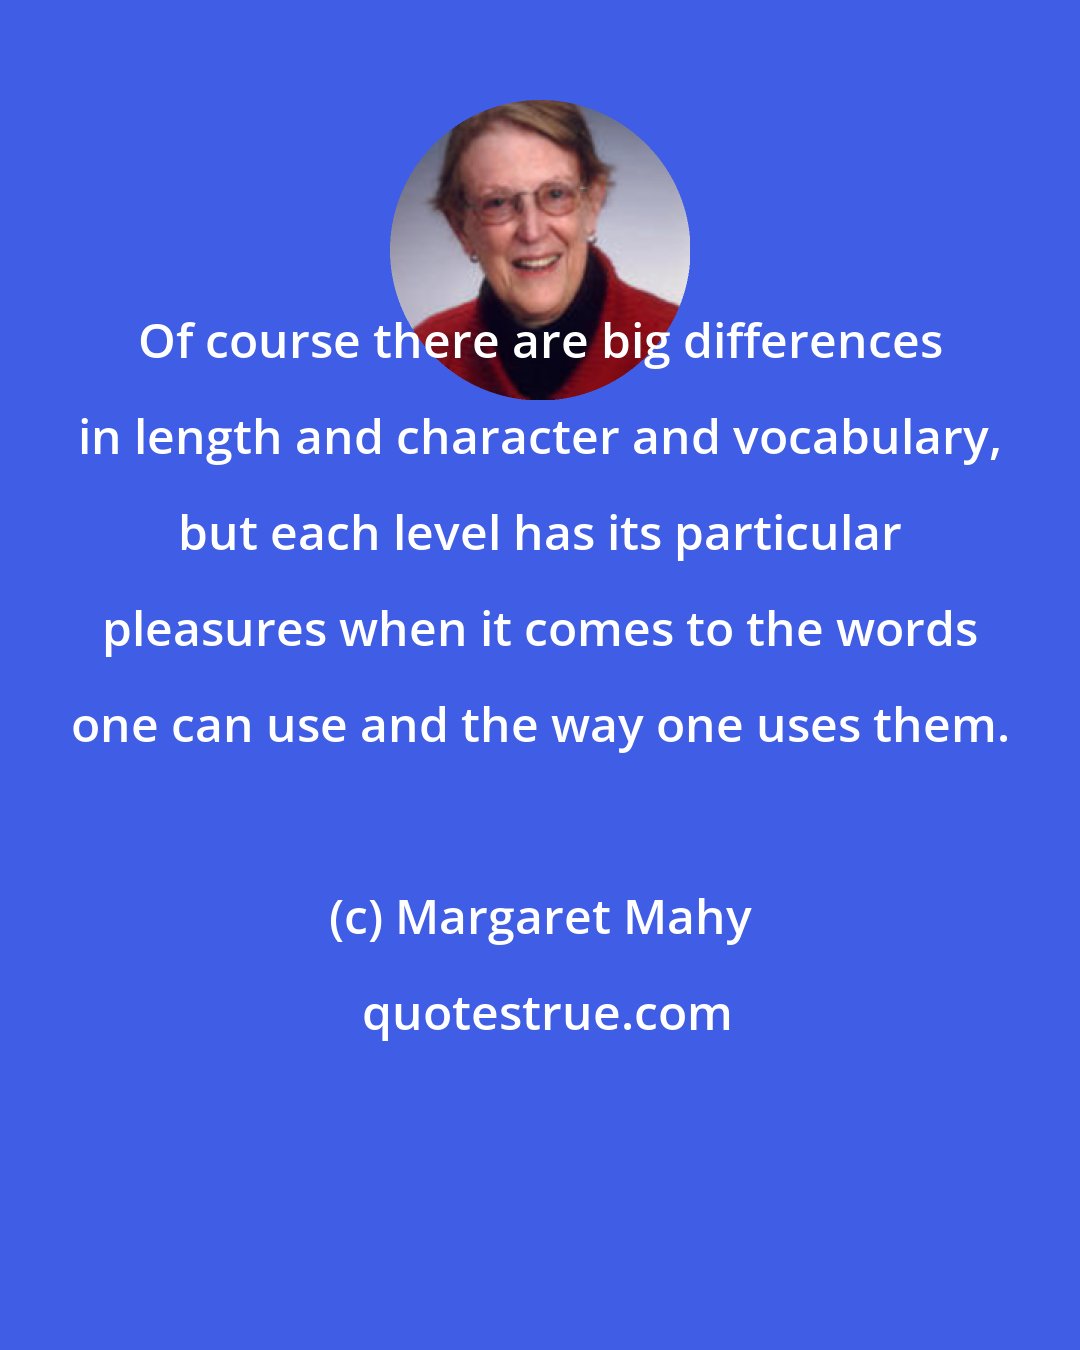 Margaret Mahy: Of course there are big differences in length and character and vocabulary, but each level has its particular pleasures when it comes to the words one can use and the way one uses them.